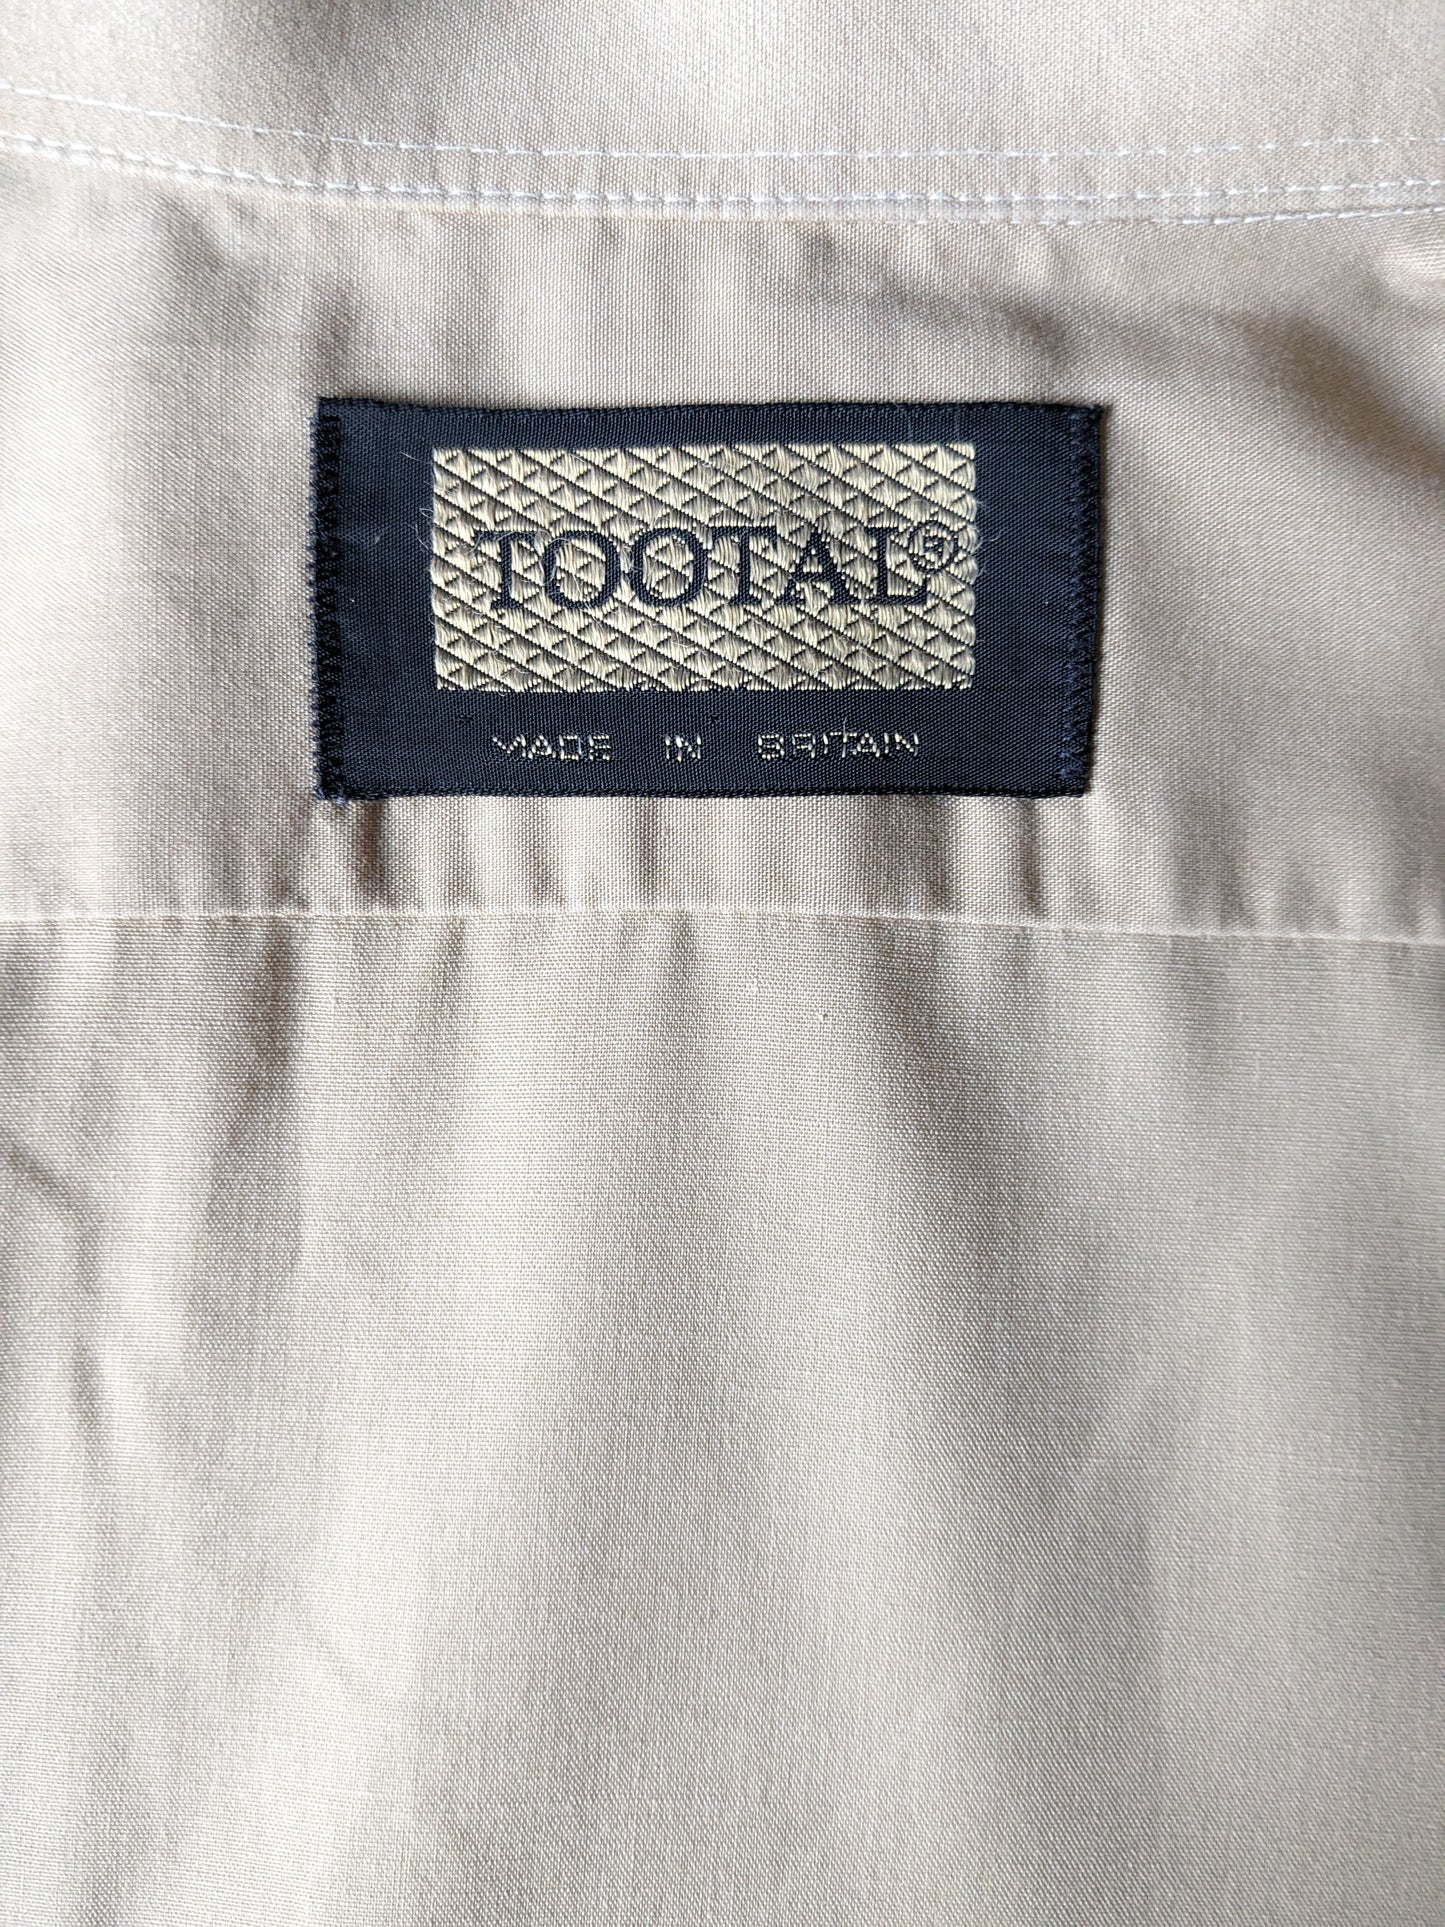 Vintage tootal 70's shirt with point collar. Light brown colored. Size M.